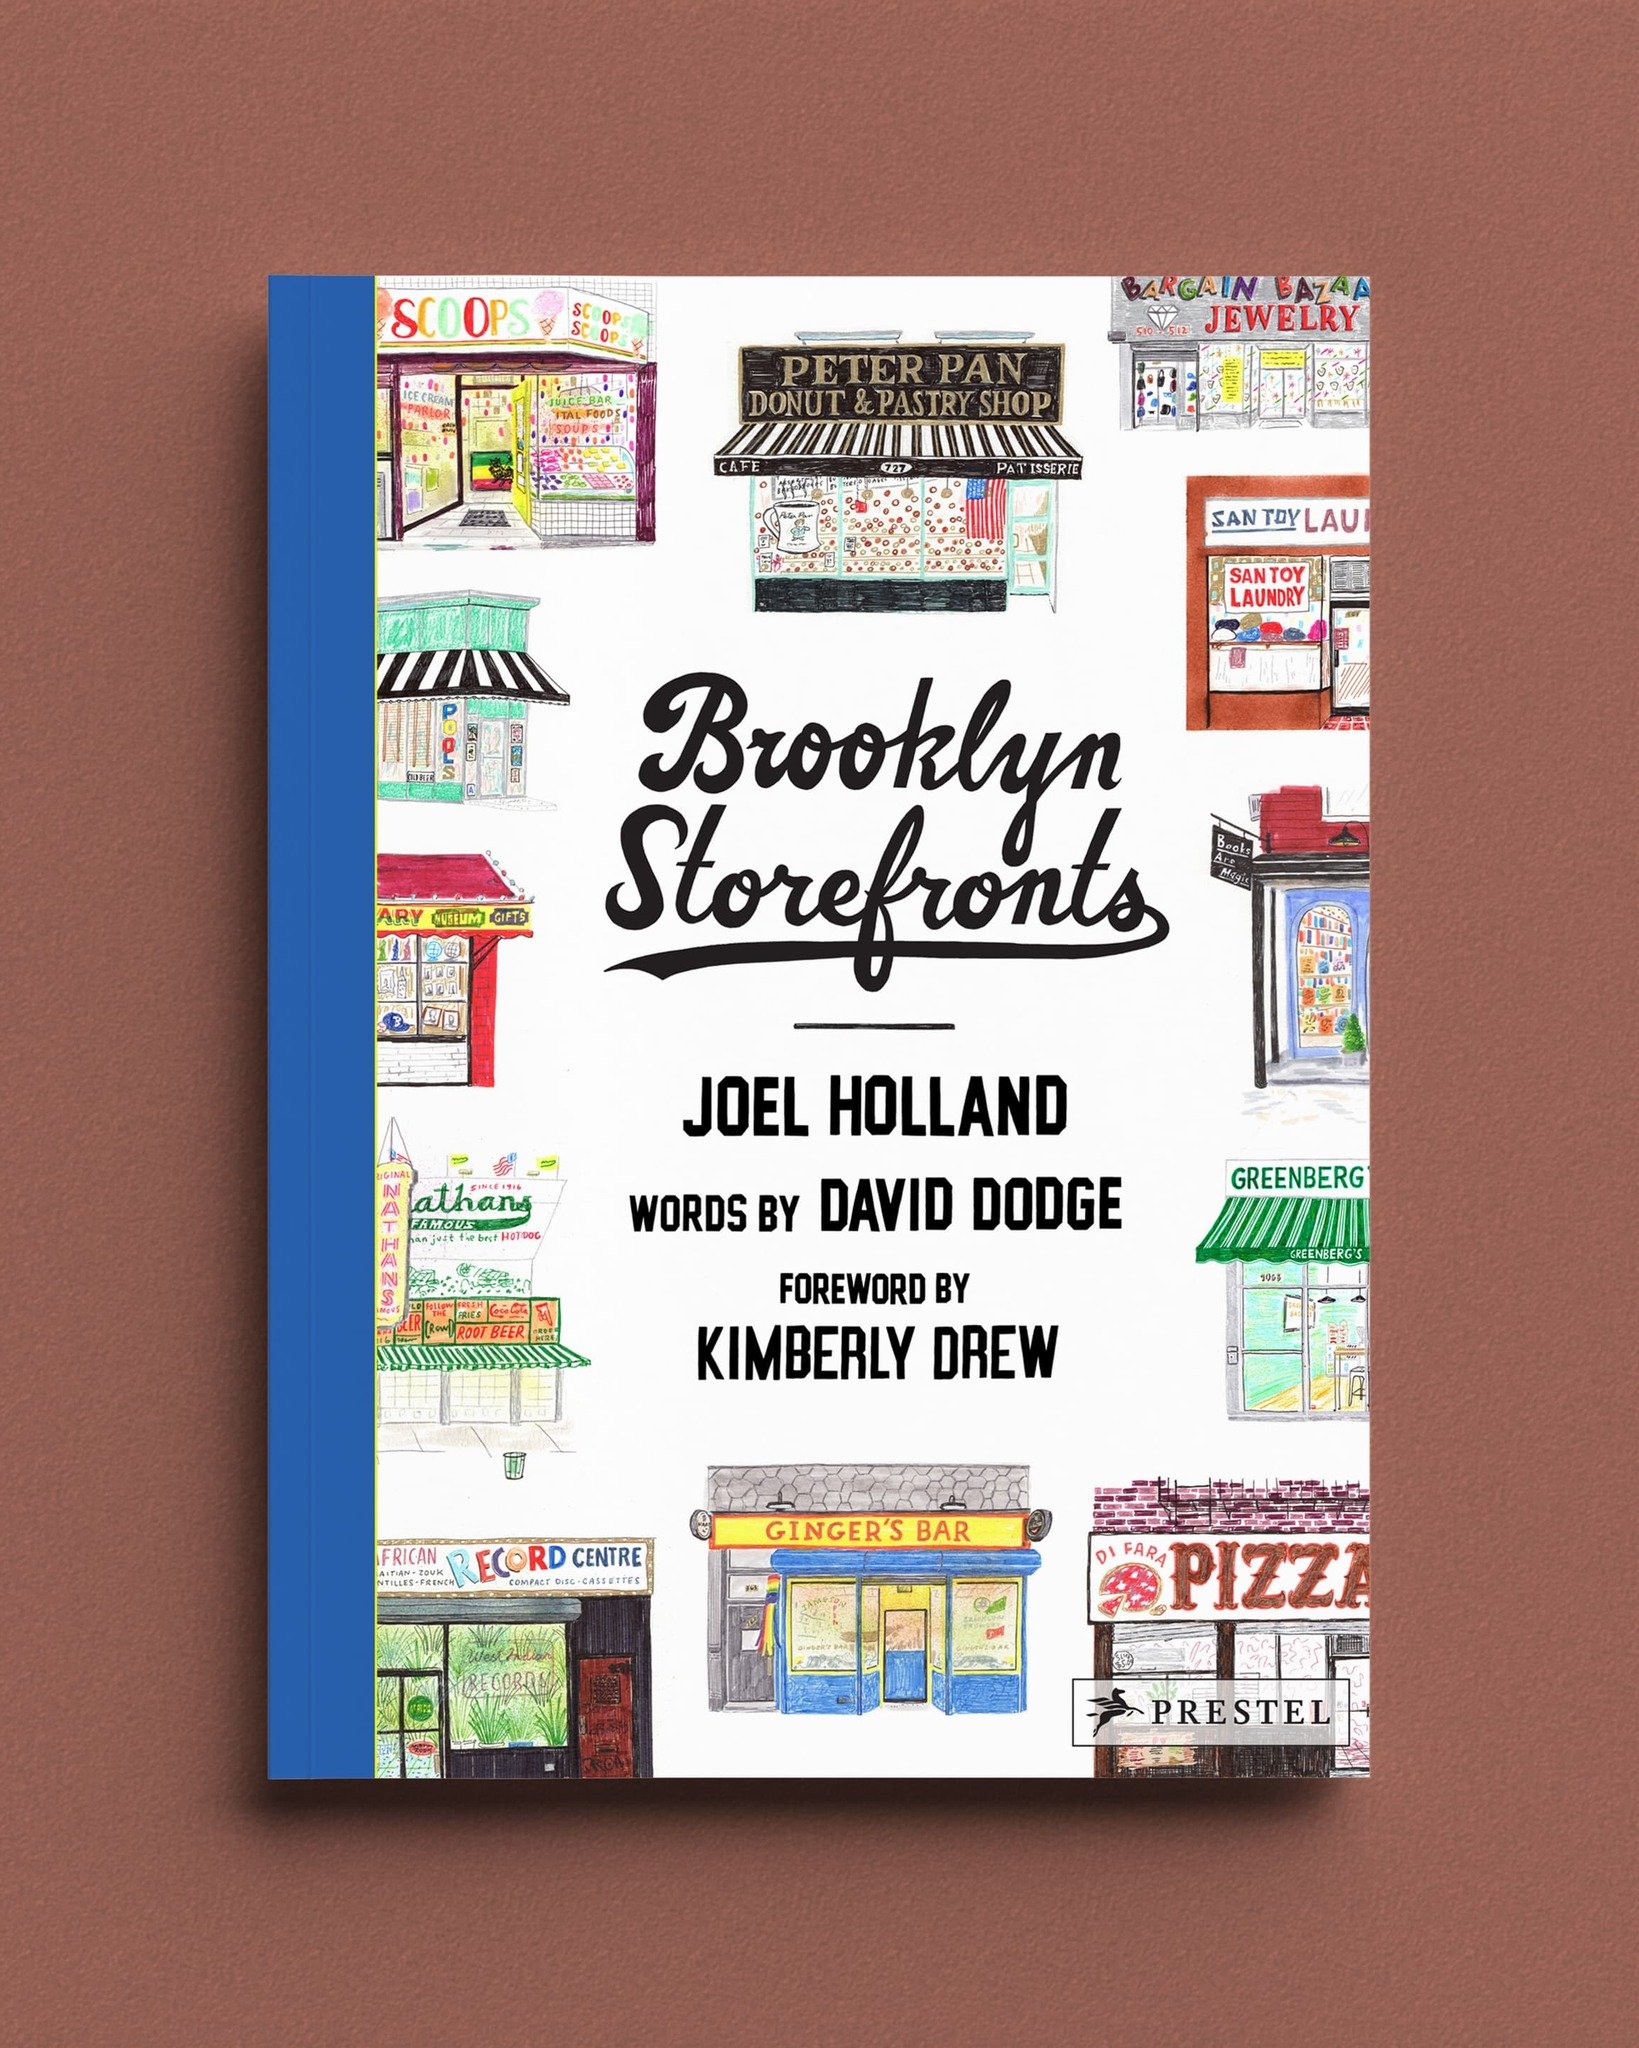 Voila! BROOKLYN STOREFRONTS! Available for preorder now! 

From illustrator @joelholland_studio + writer @bydaviddodge 
Edited by @gitlowww 
Foreword by @museummammy 
Published by @prestel_publishing 
Designed by @chickfriedstike 

Paying homage to o